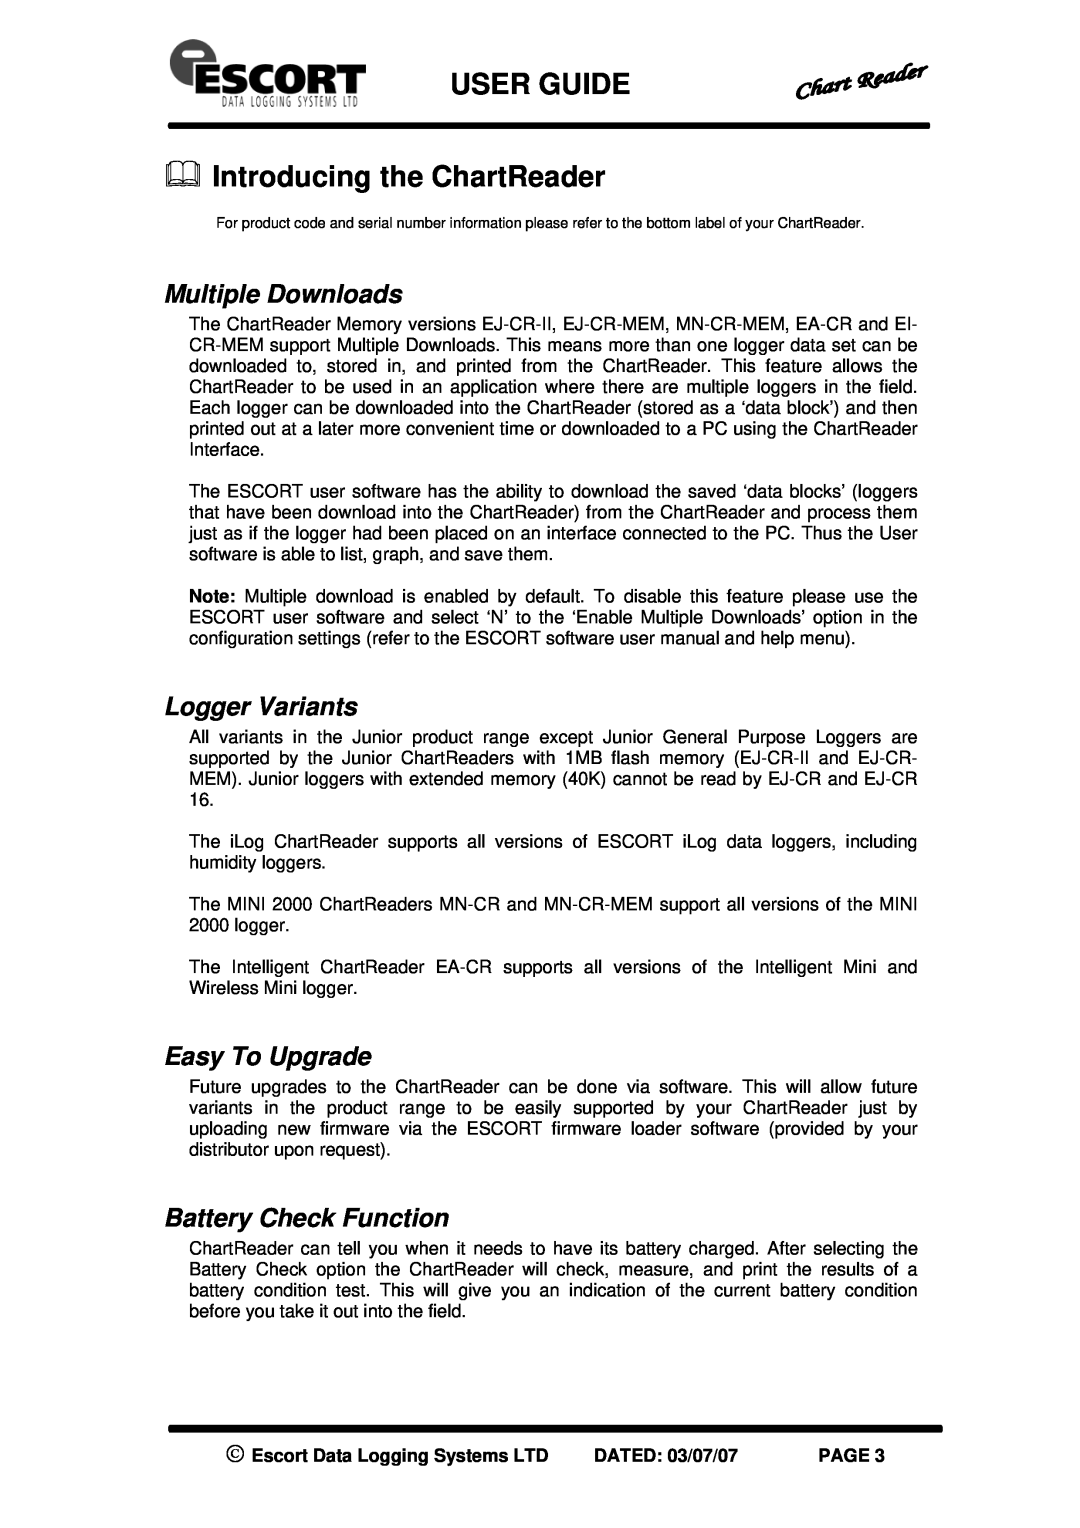 Escort EA-CR USER GUIDE Introducing the ChartReader, Multiple Downloads, Logger Variants, Easy To Upgrade, DATED 03/07/07 